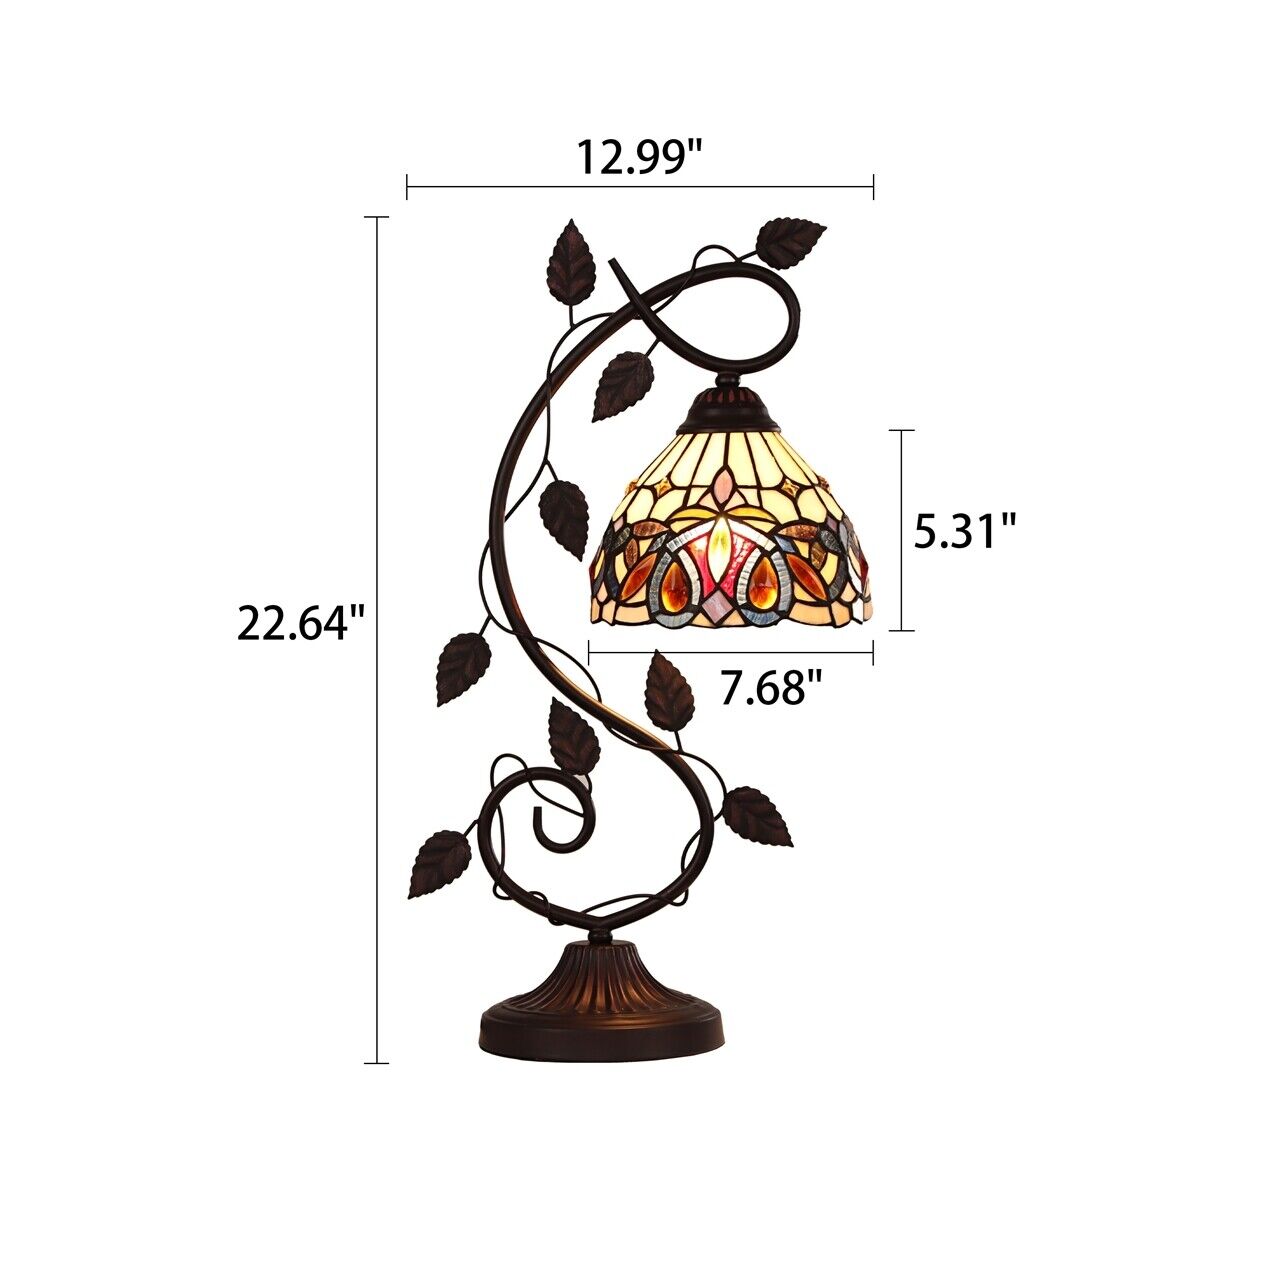 22.64" Vintage Style Stained Glass Table Lamp